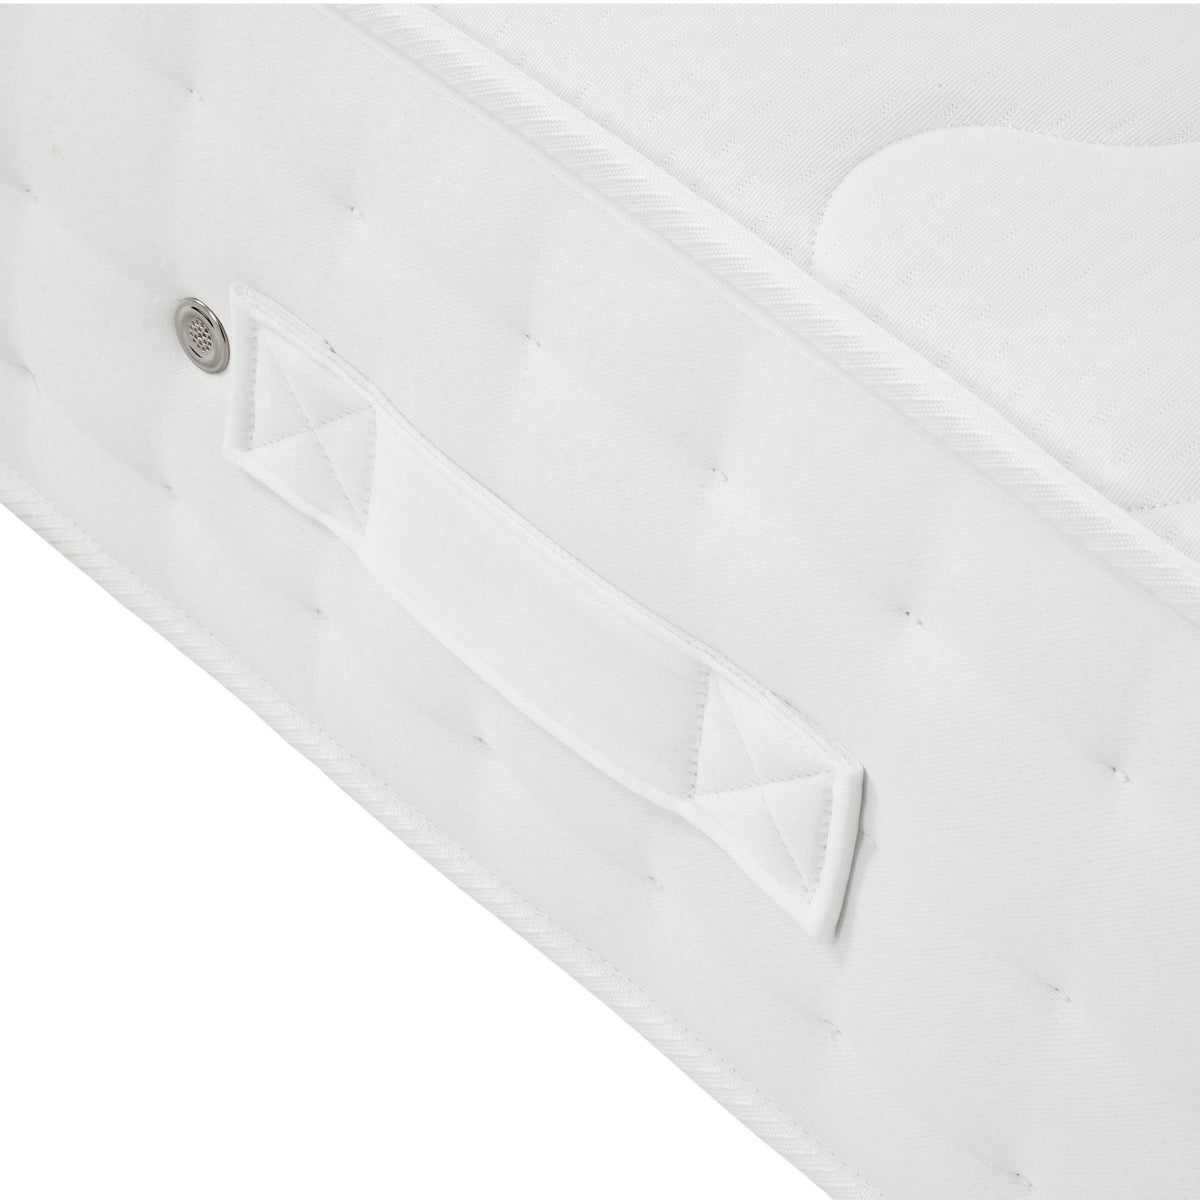 Roseland Sleep Comfort Quilted Mattress edge close up with handle